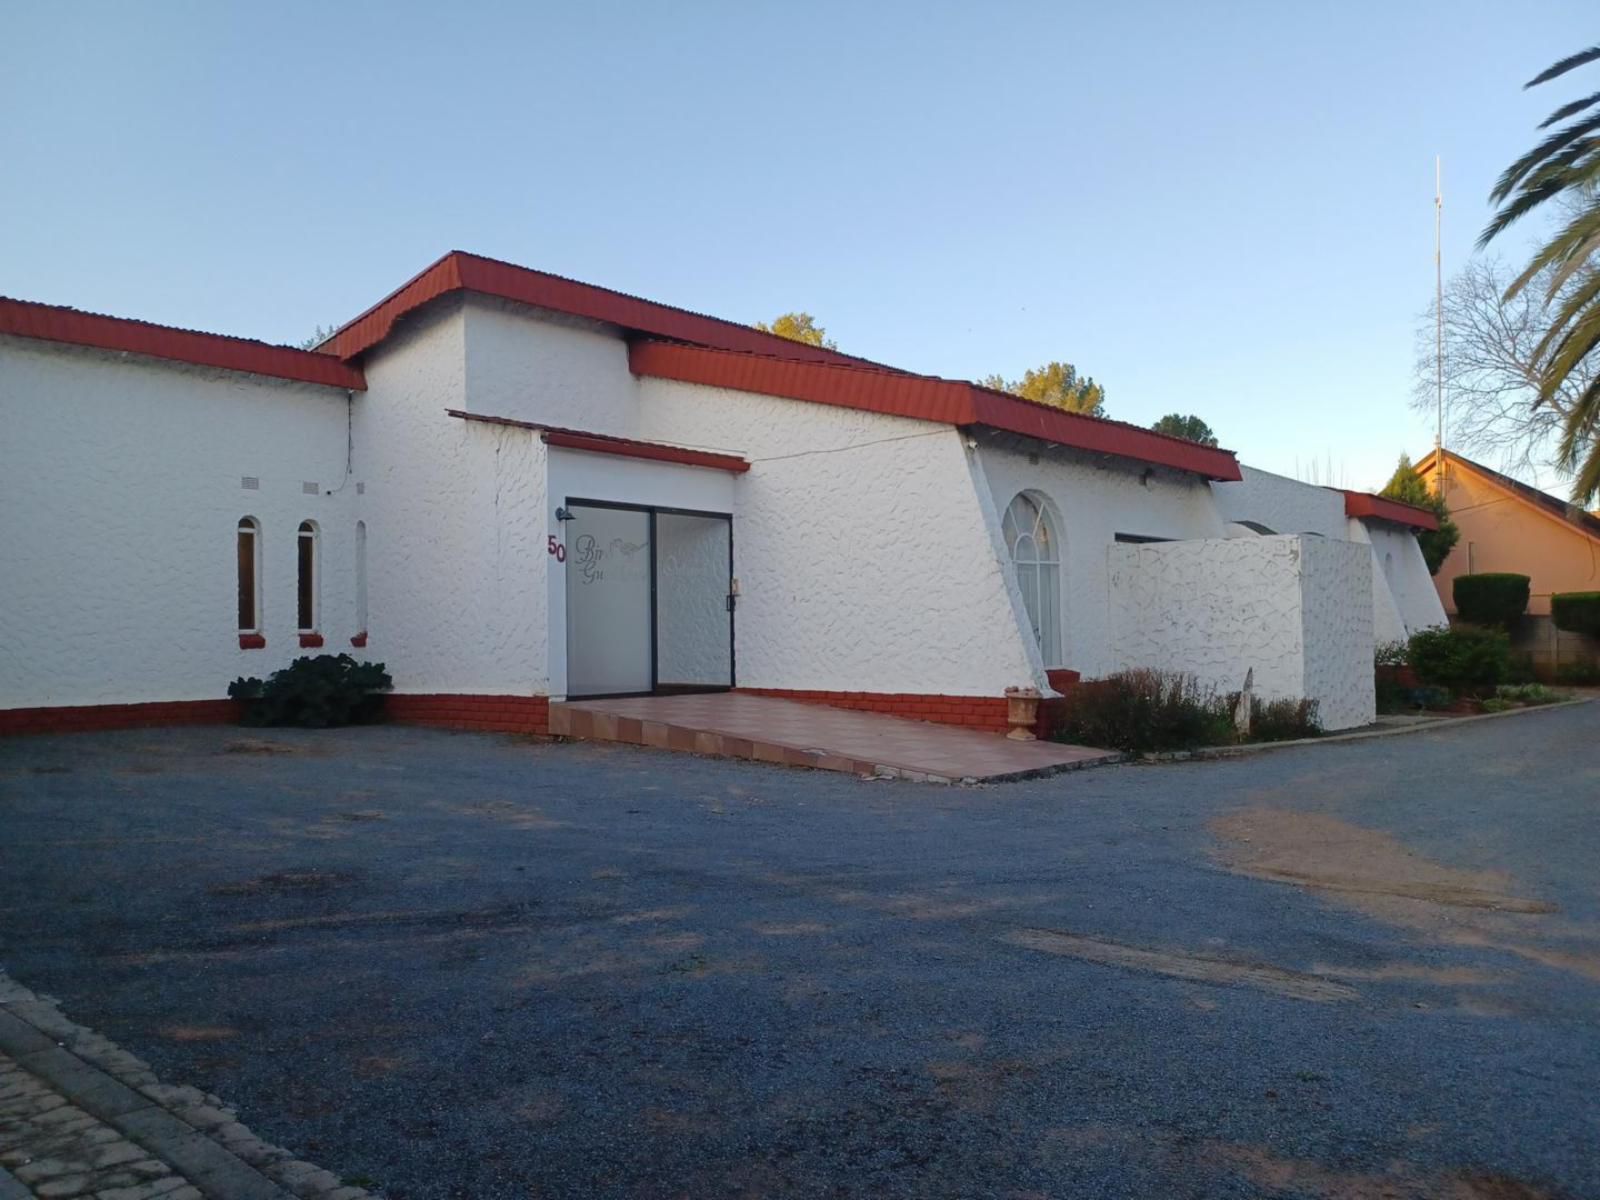 Bird Guesthouse Vryburg North West Province South Africa House, Building, Architecture